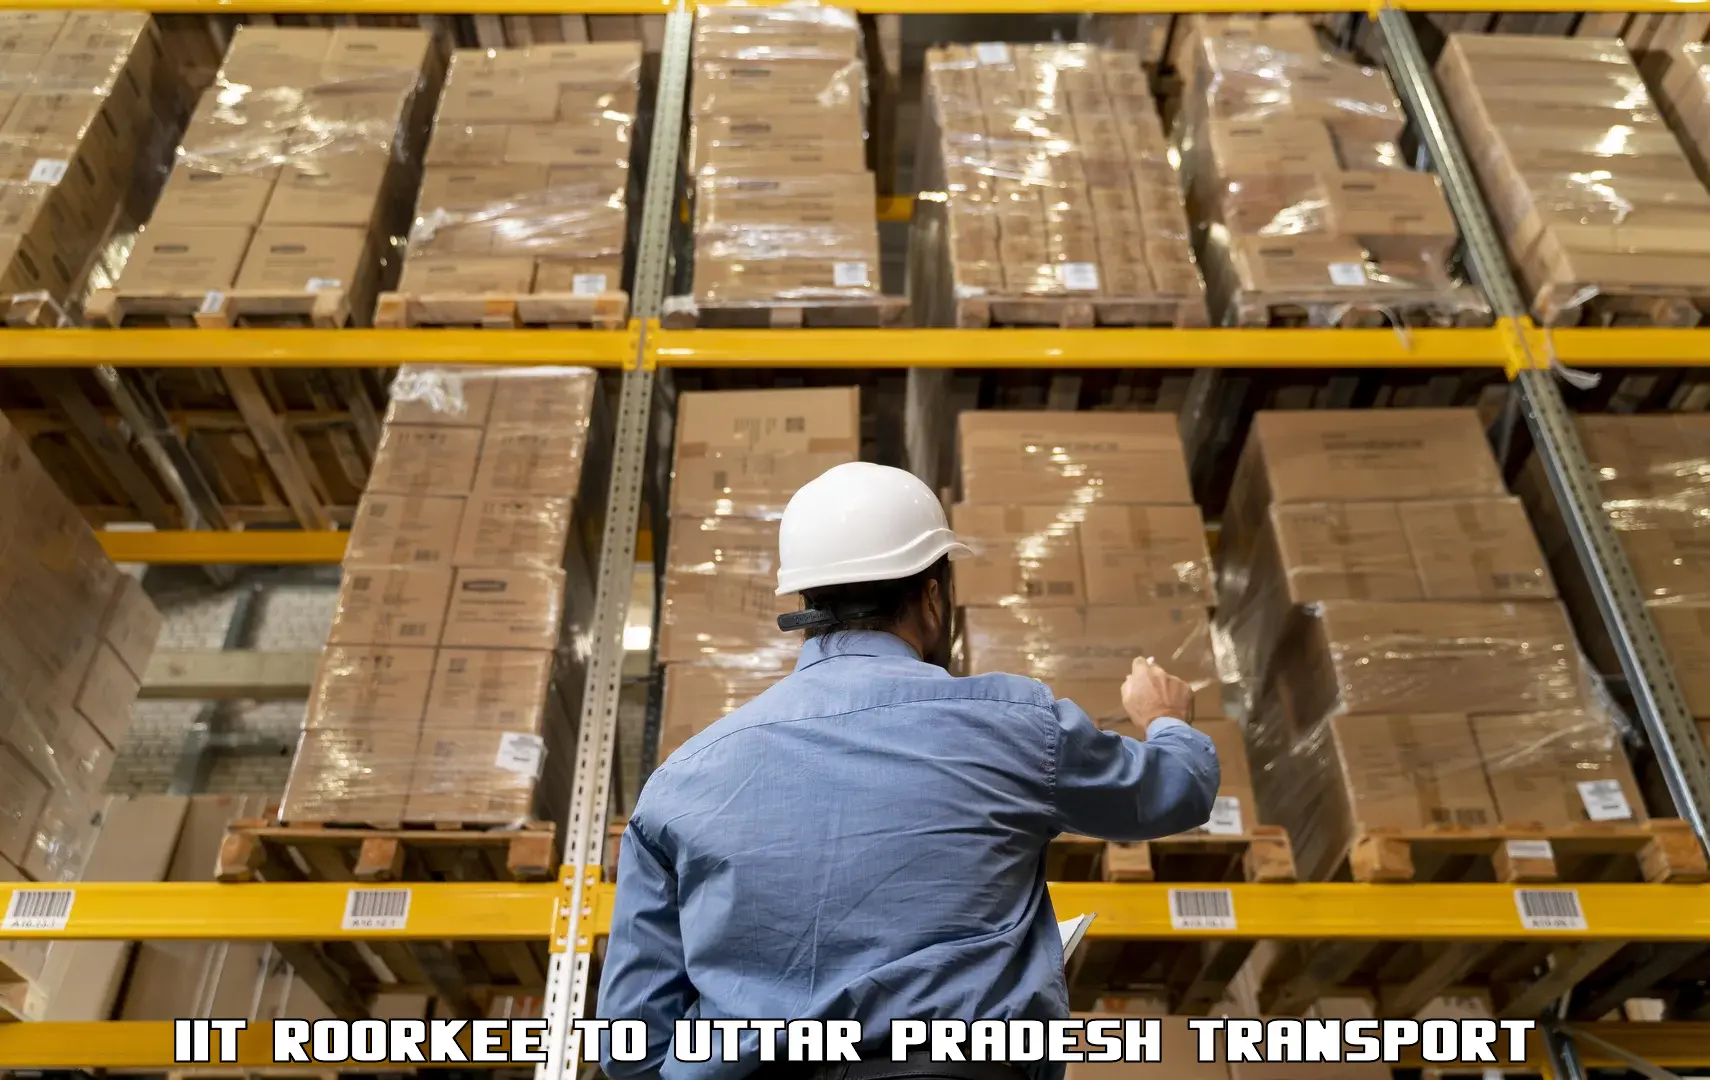 Commercial transport service IIT Roorkee to Saharanpur